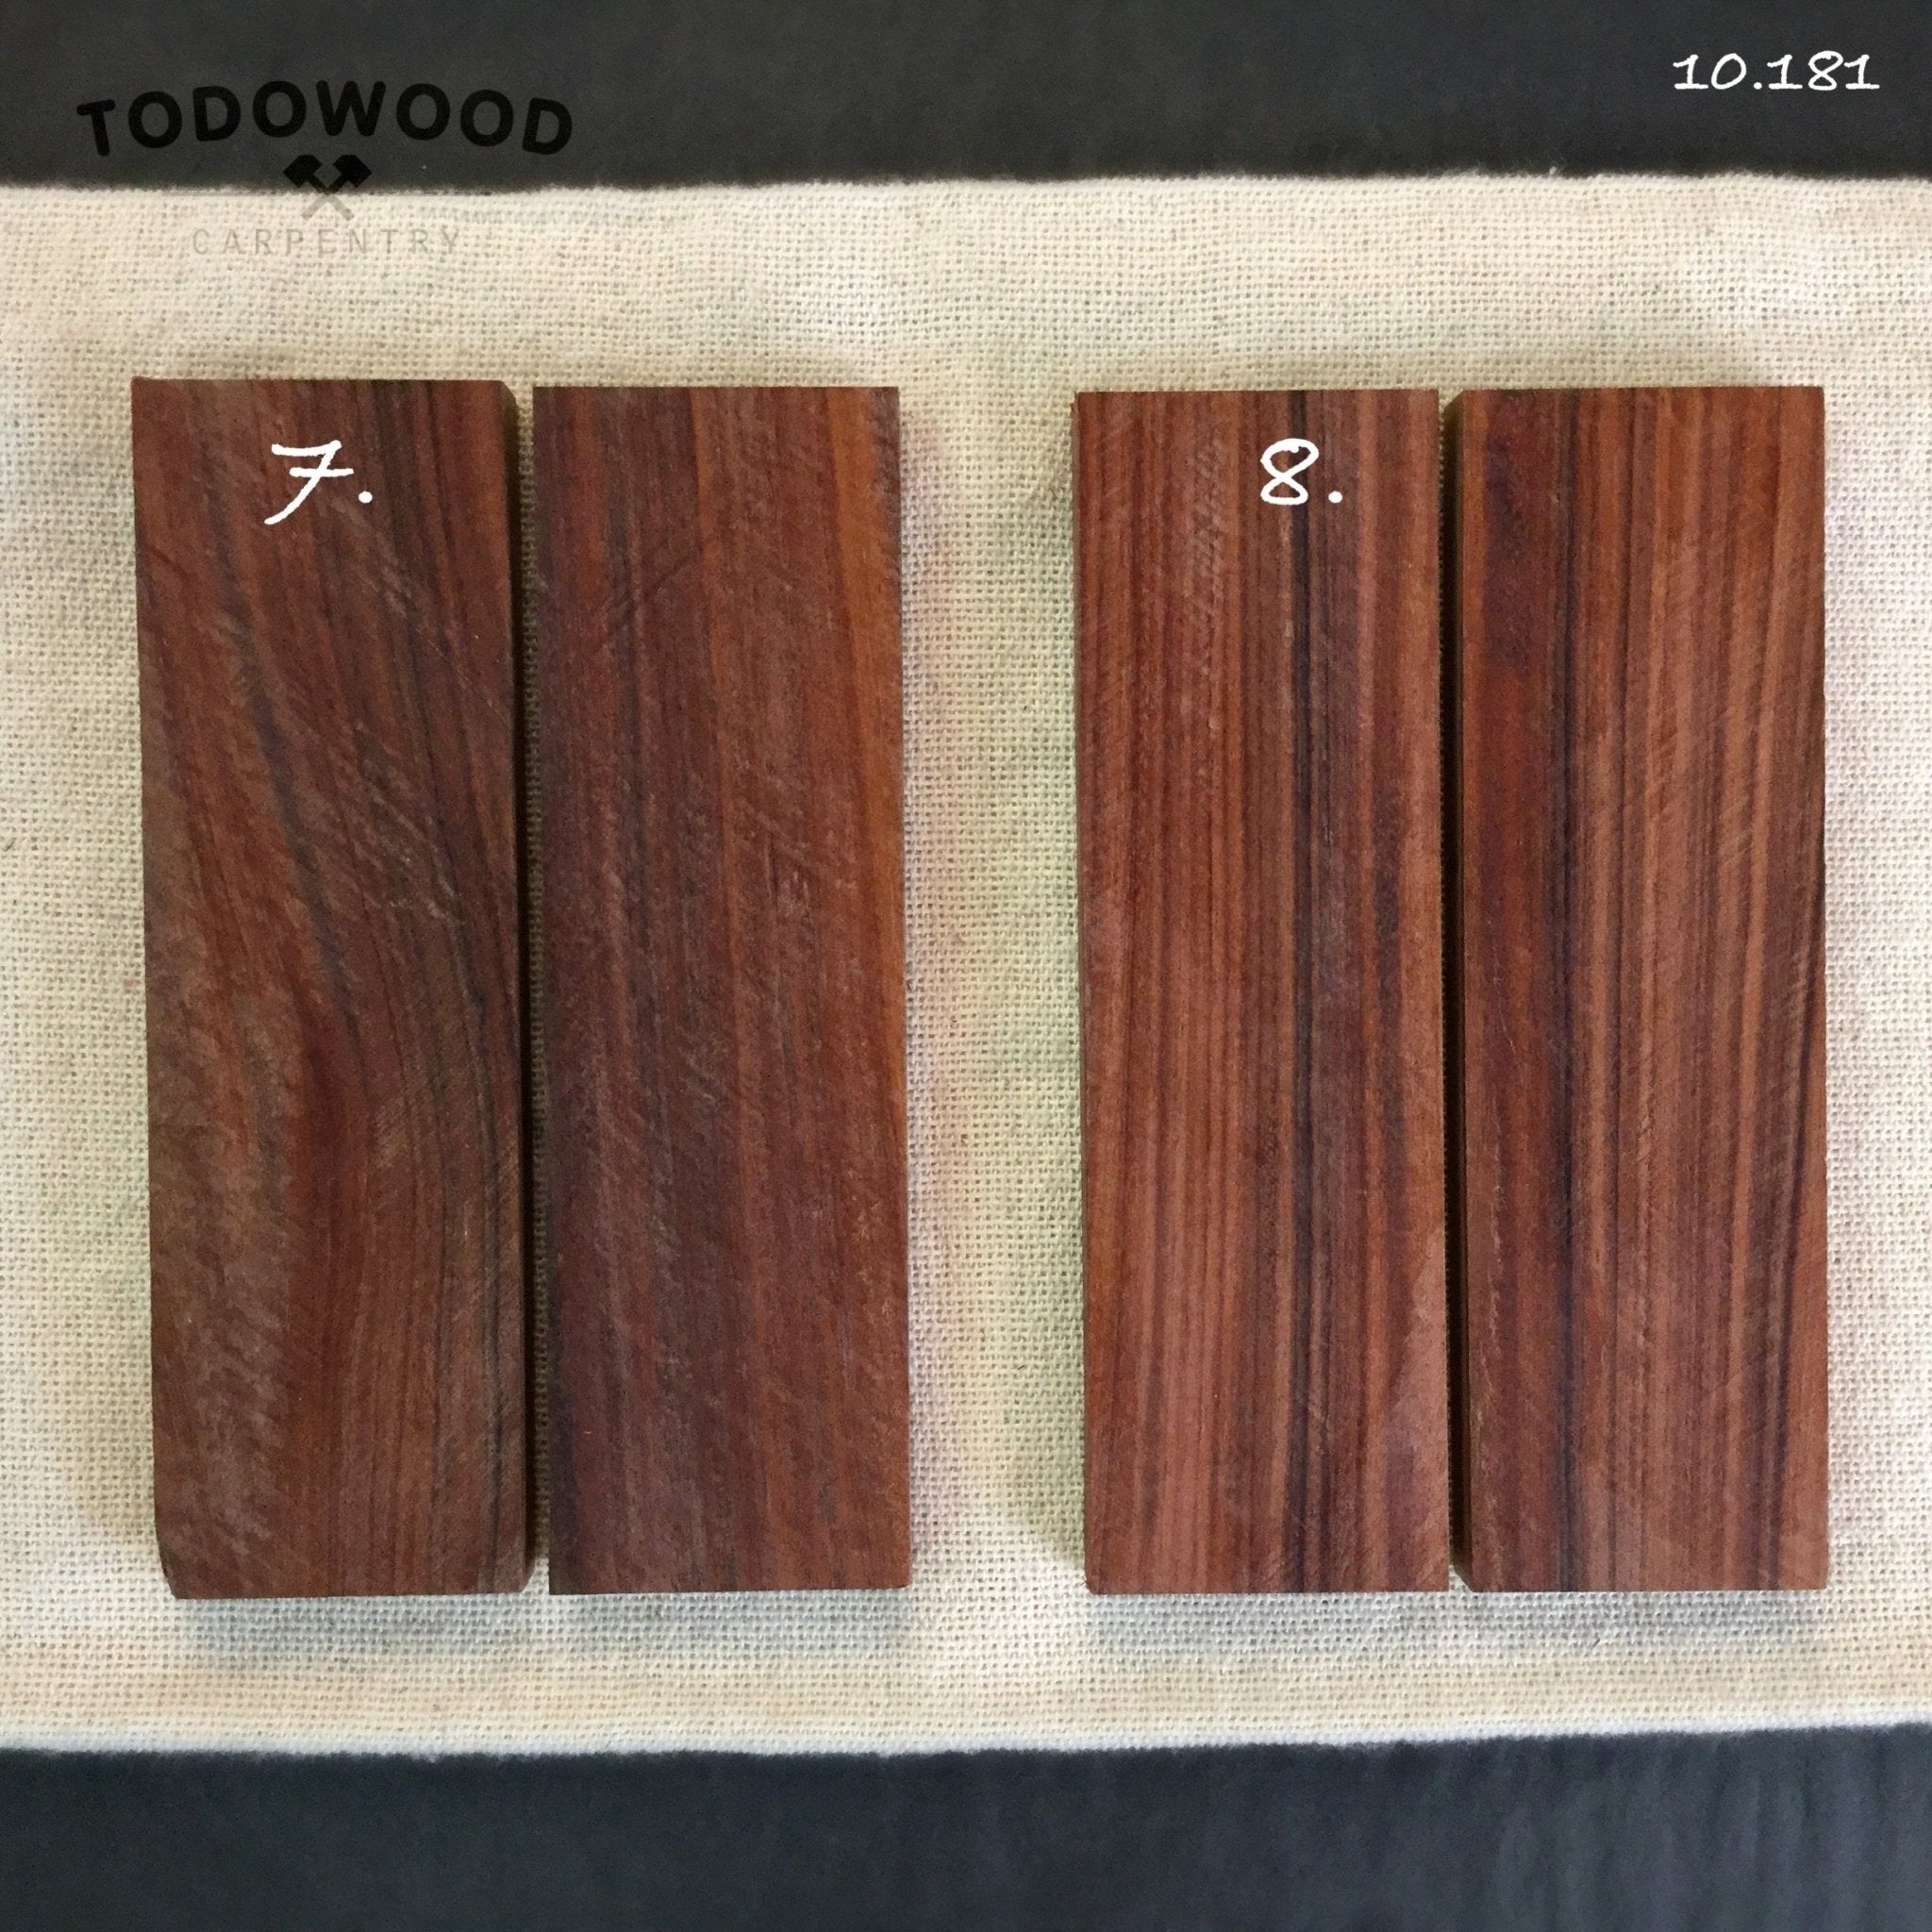 ROSEWOOD Blanks Paired for Crafting, Woodworking, DIY precious woods